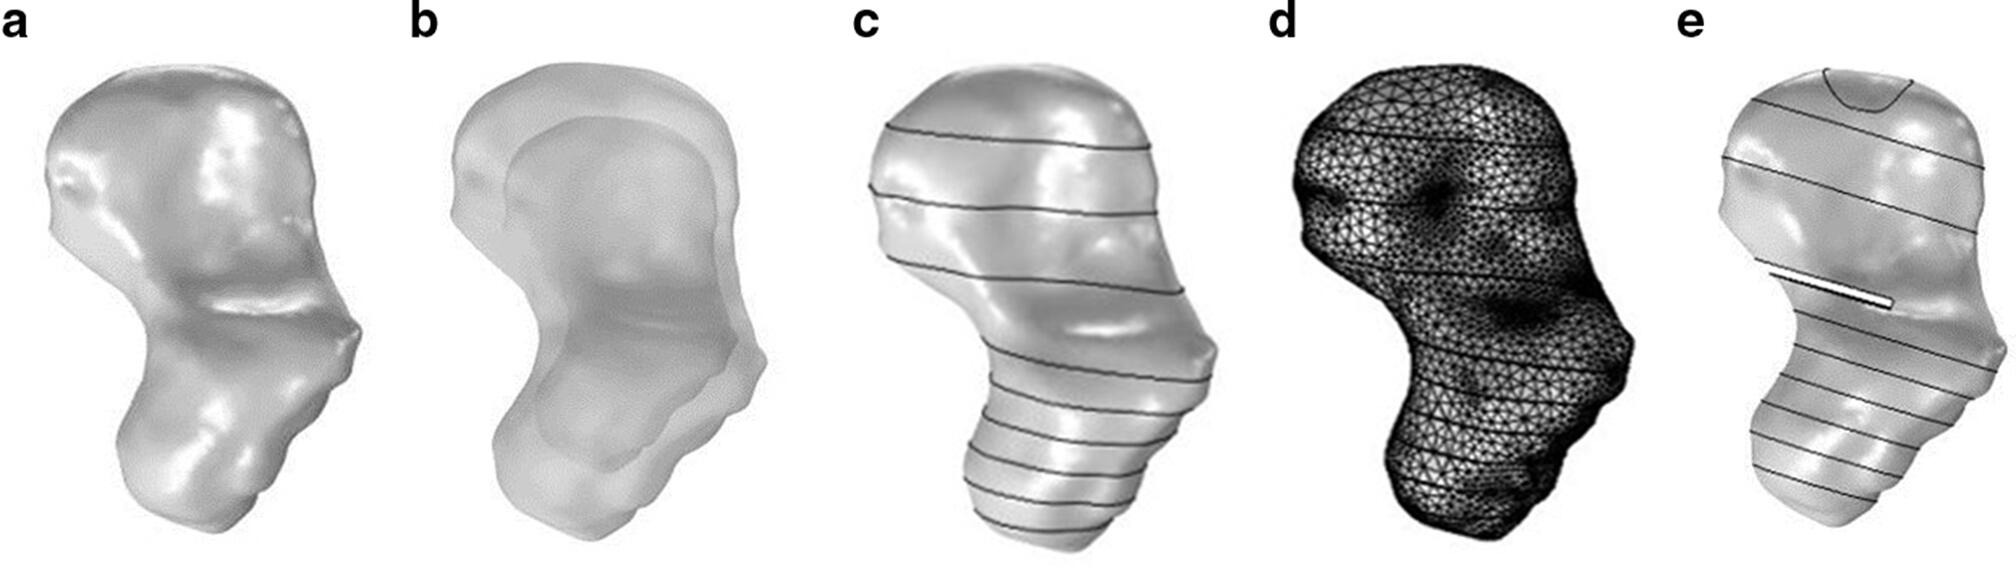 Fig. 1 
          a) 3D scaphoid model. b) Subchondral and cancellous scaphoid. c) 3D scaphoid model divided into the aforementioned region. d) Scaphoid mesh. e) Finalized fractured scaphoid model. Circle around distal pole represents where the 100 N compressive load was applied.
        